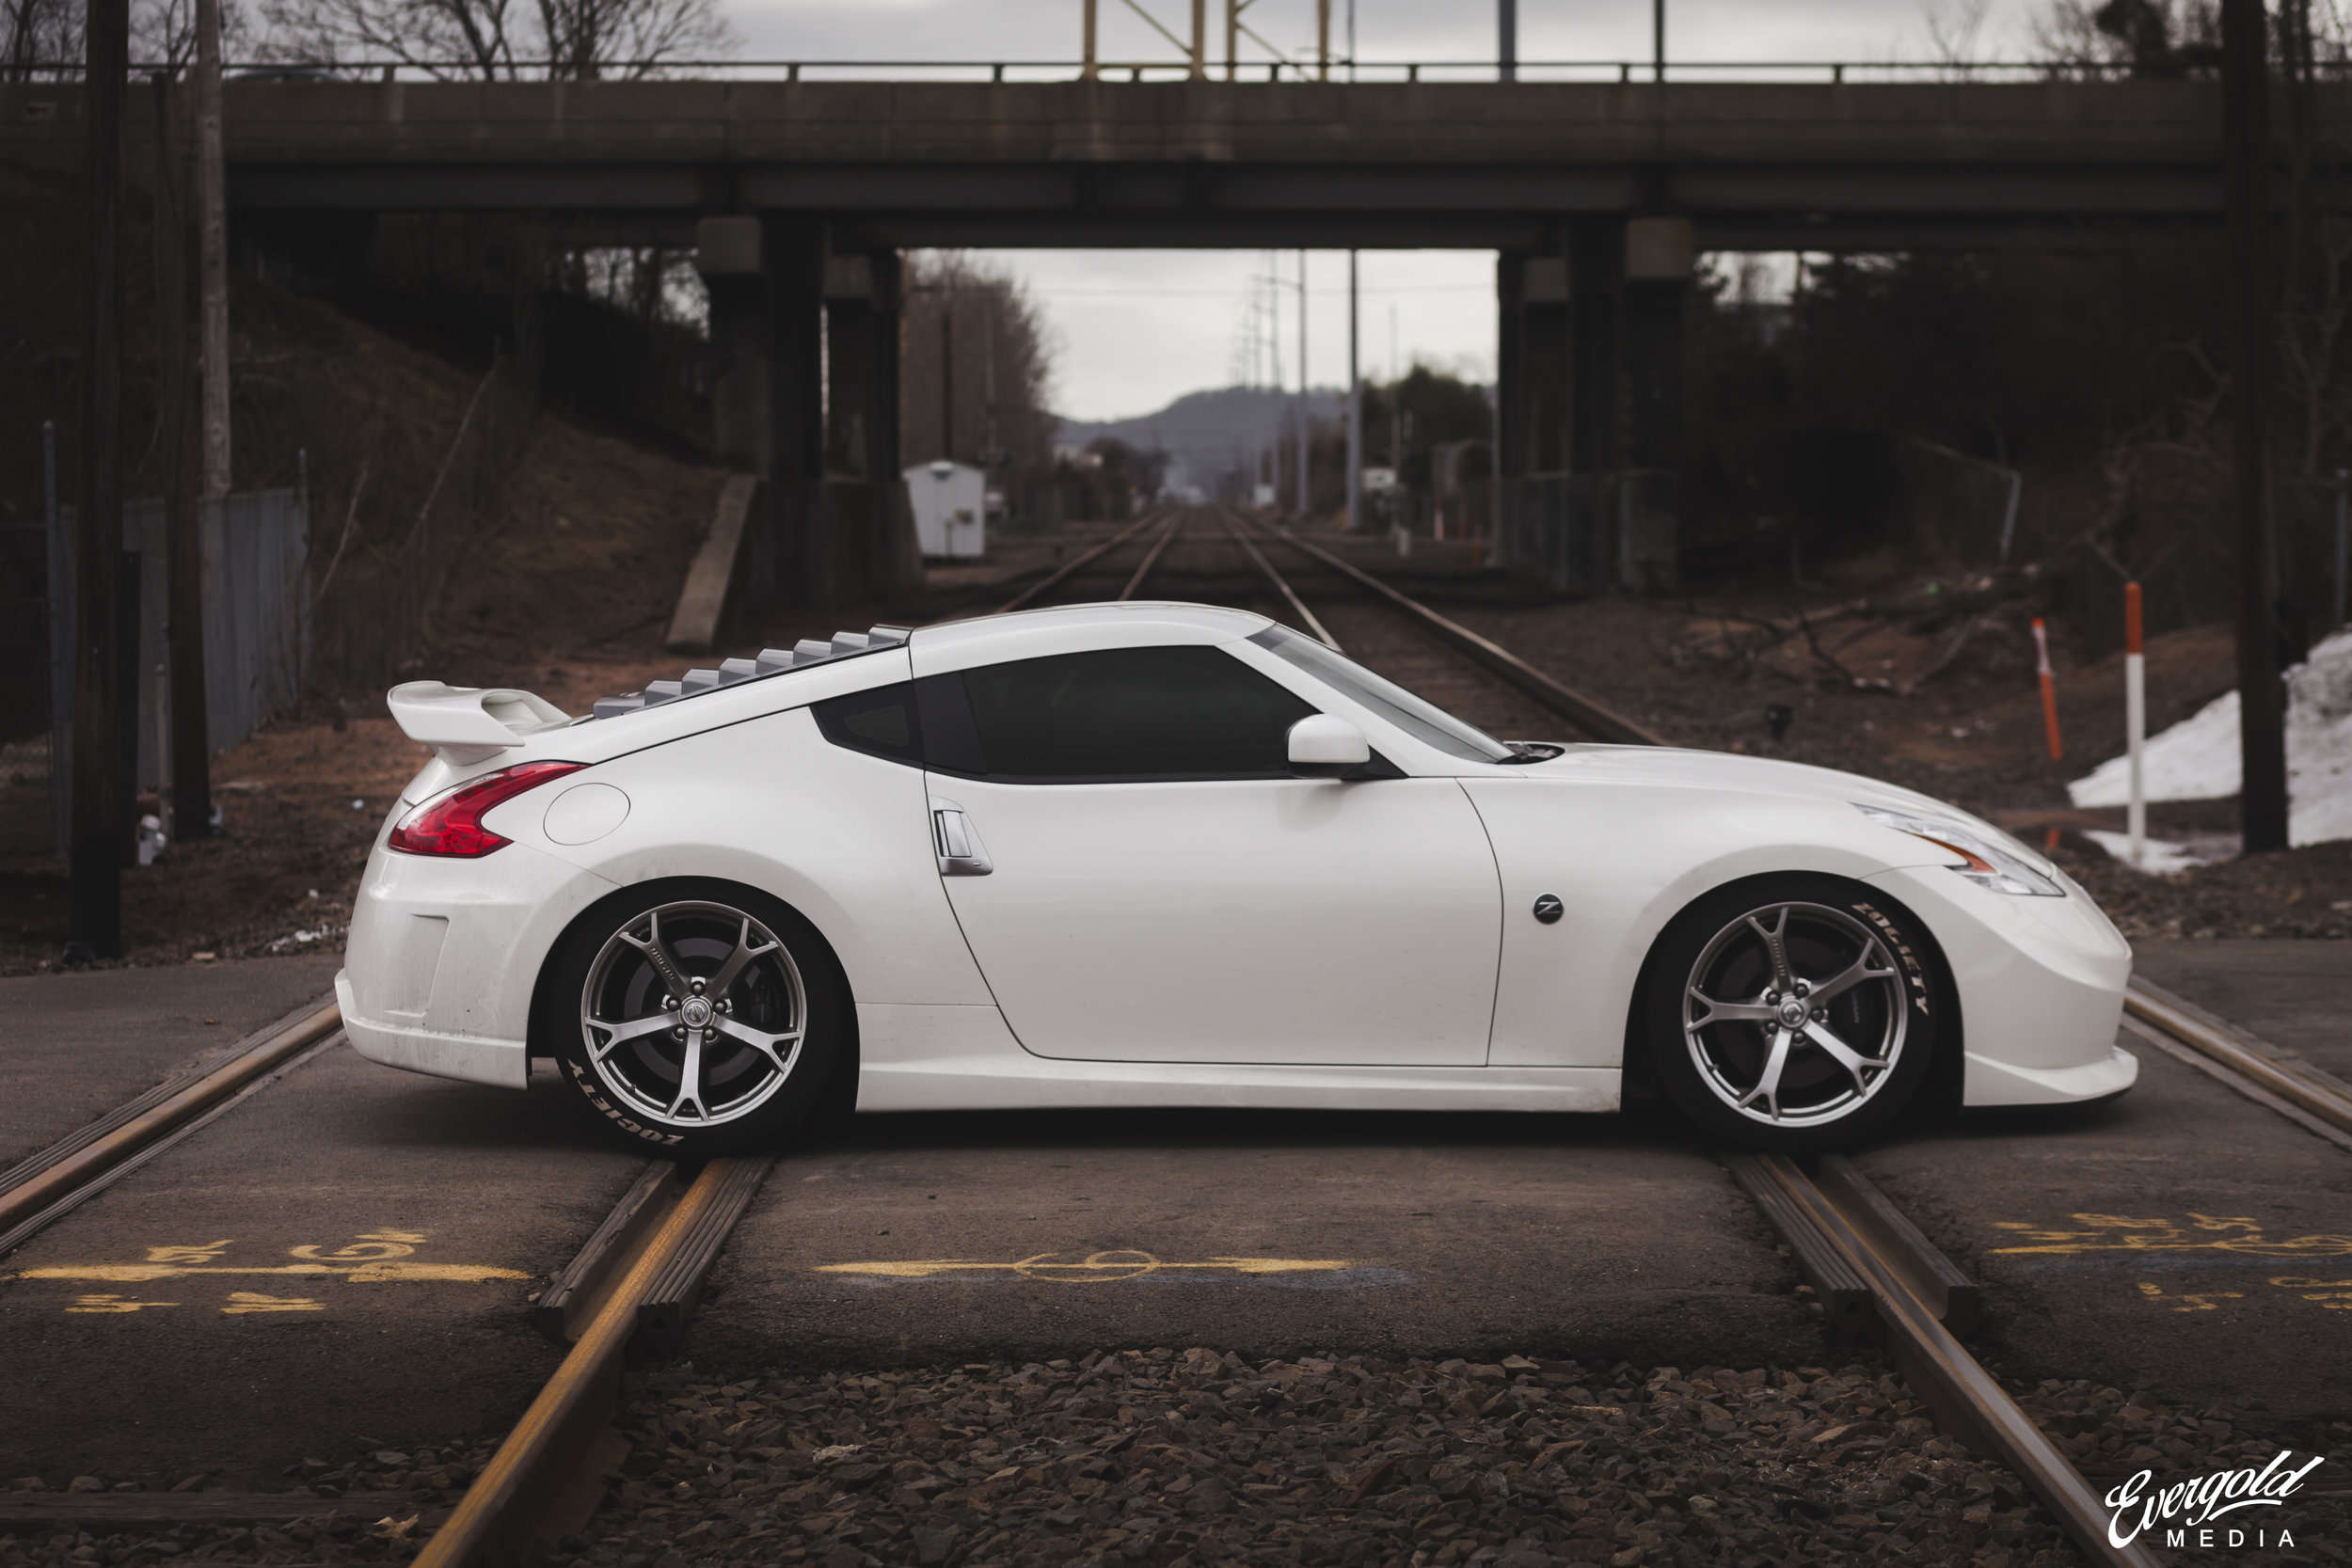 General 2500x1667 railway railway crossing white cars Nissan 370Z Nissan Fairlady Z Nissan Japanese cars sports car car watermarked side view vehicle